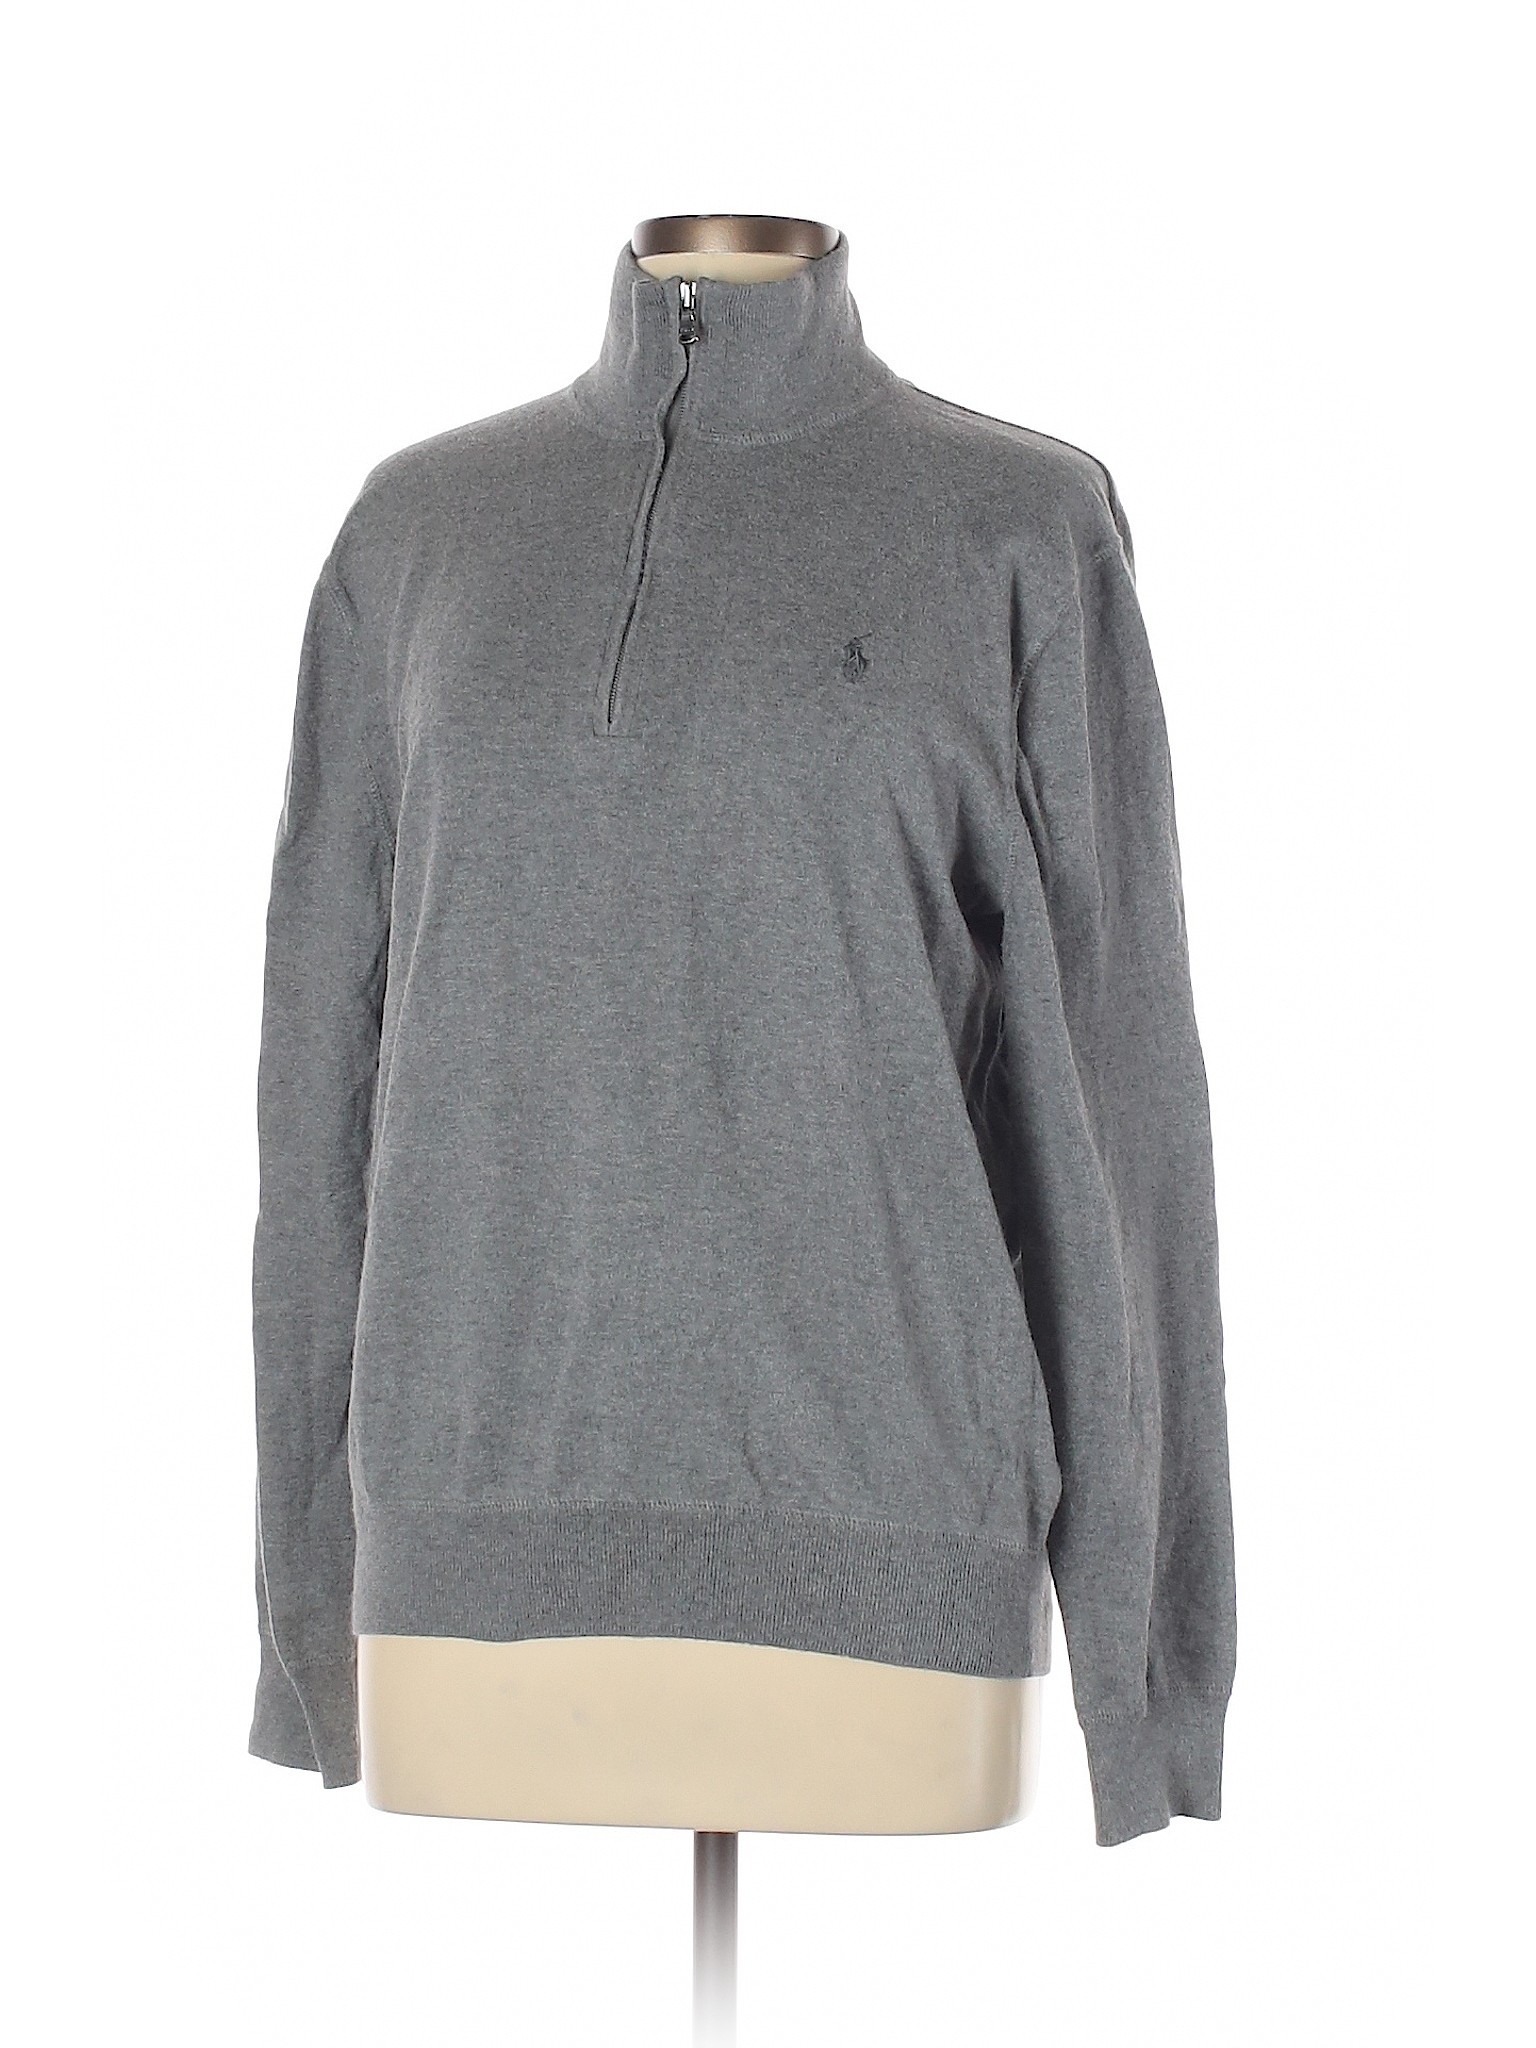 Polo by Ralph Lauren 100% Cotton Solid Gray Pullover Sweater Size L ...